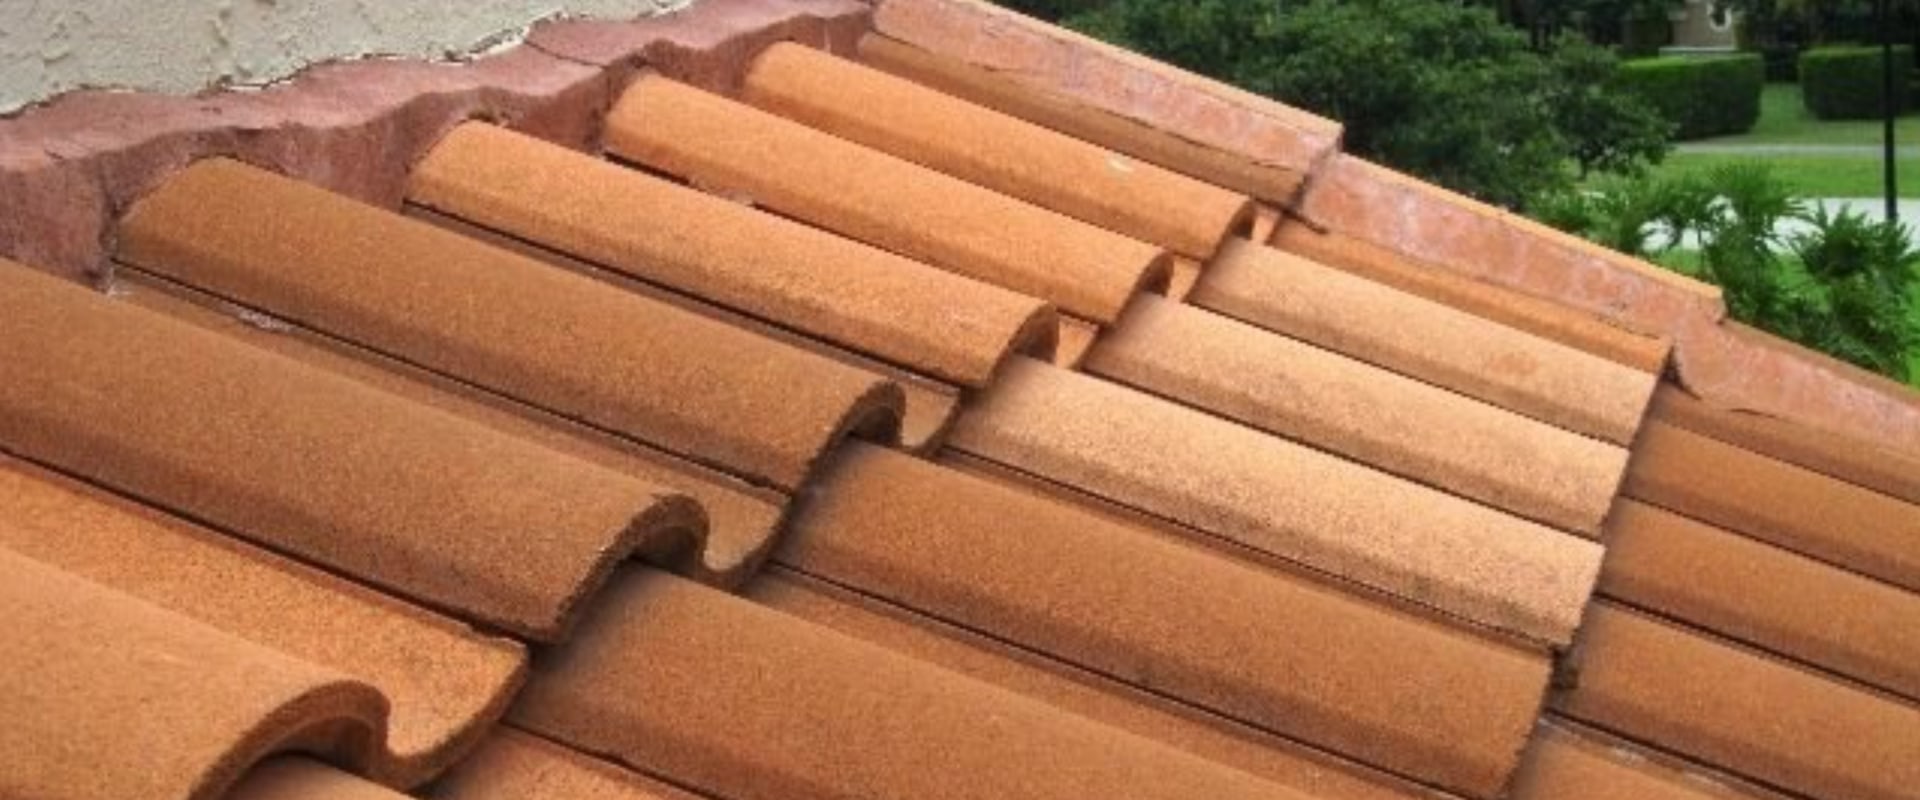 Clay Tile Roofs for Residential Roofs